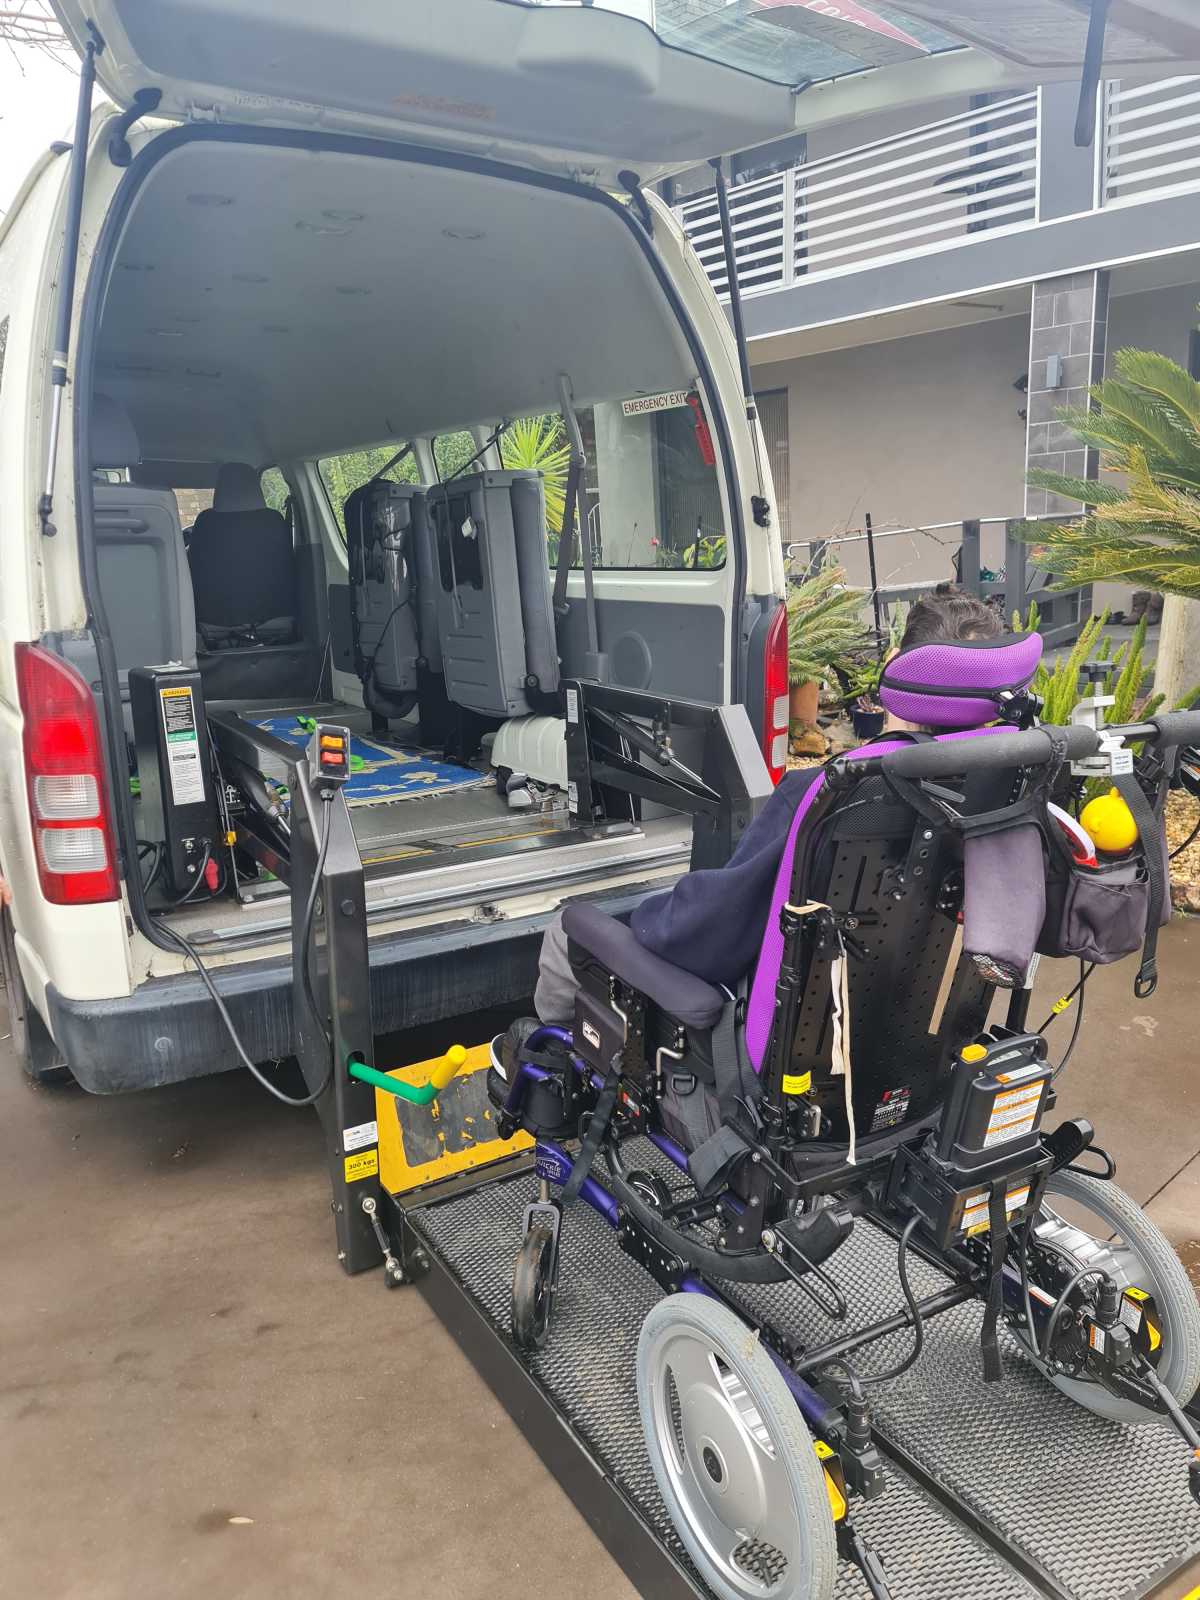 The back of a large white van with a wheelchair being lifted into the van.